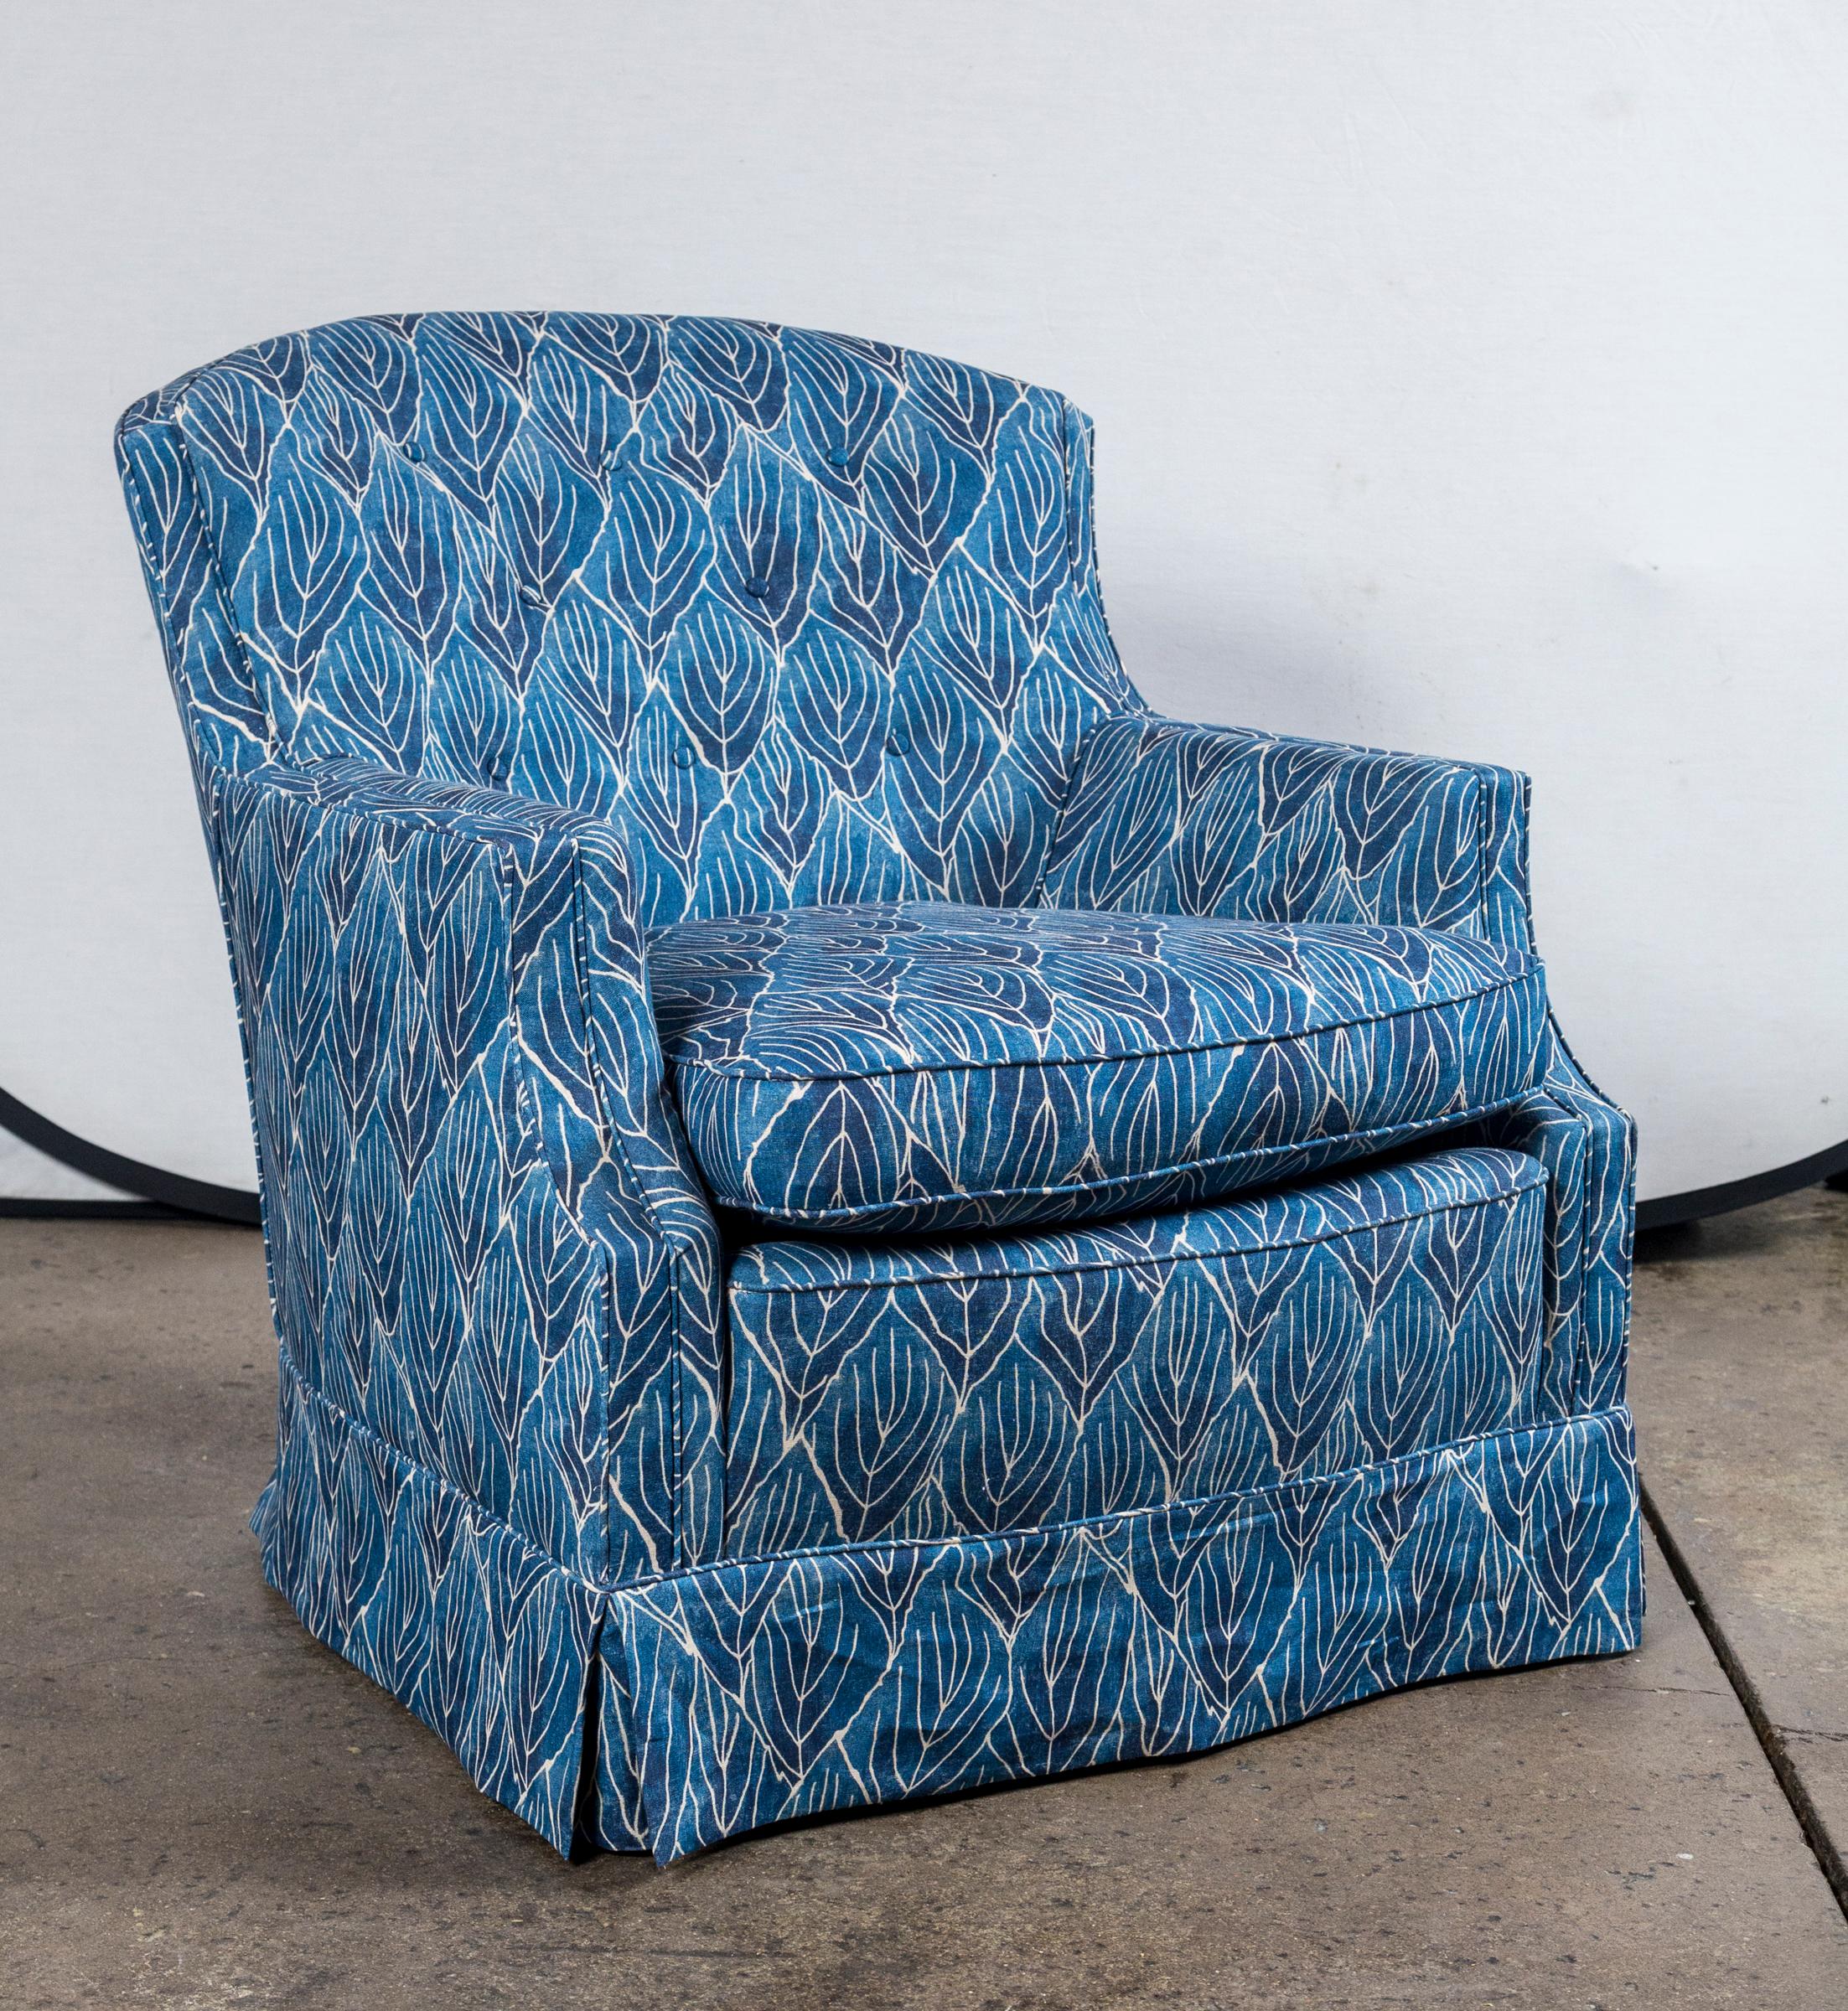 Pair of Vintage Blue Club Chairs, Newly Upholstered in Robert Kime Nara Fabric 1